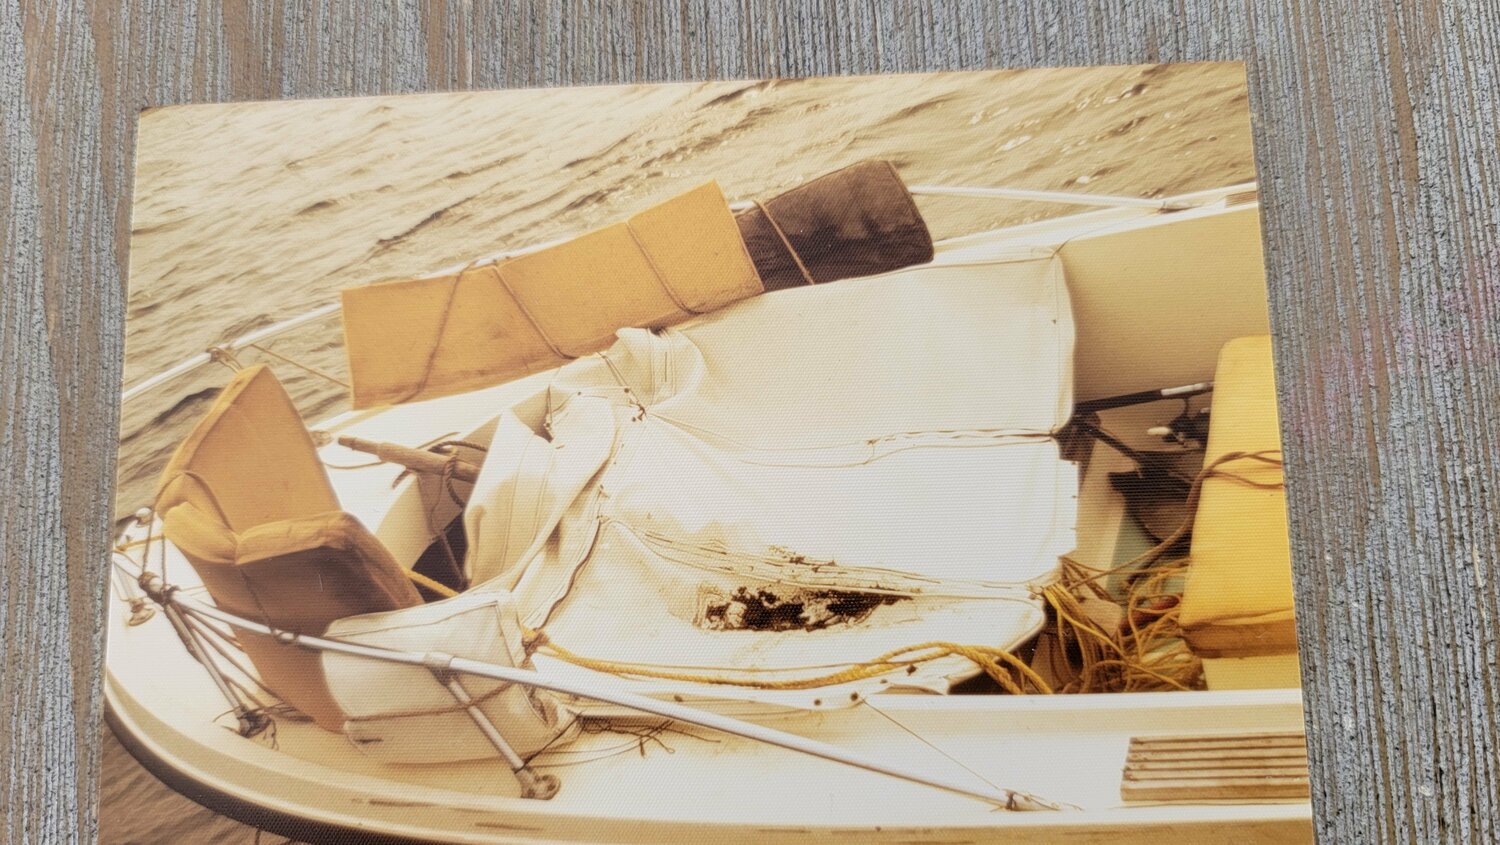 A photo from 1973 of the 19-foot boat six adult siblings were stranded in, including the makeshift canopy they slept under made from the cushions of the boat.